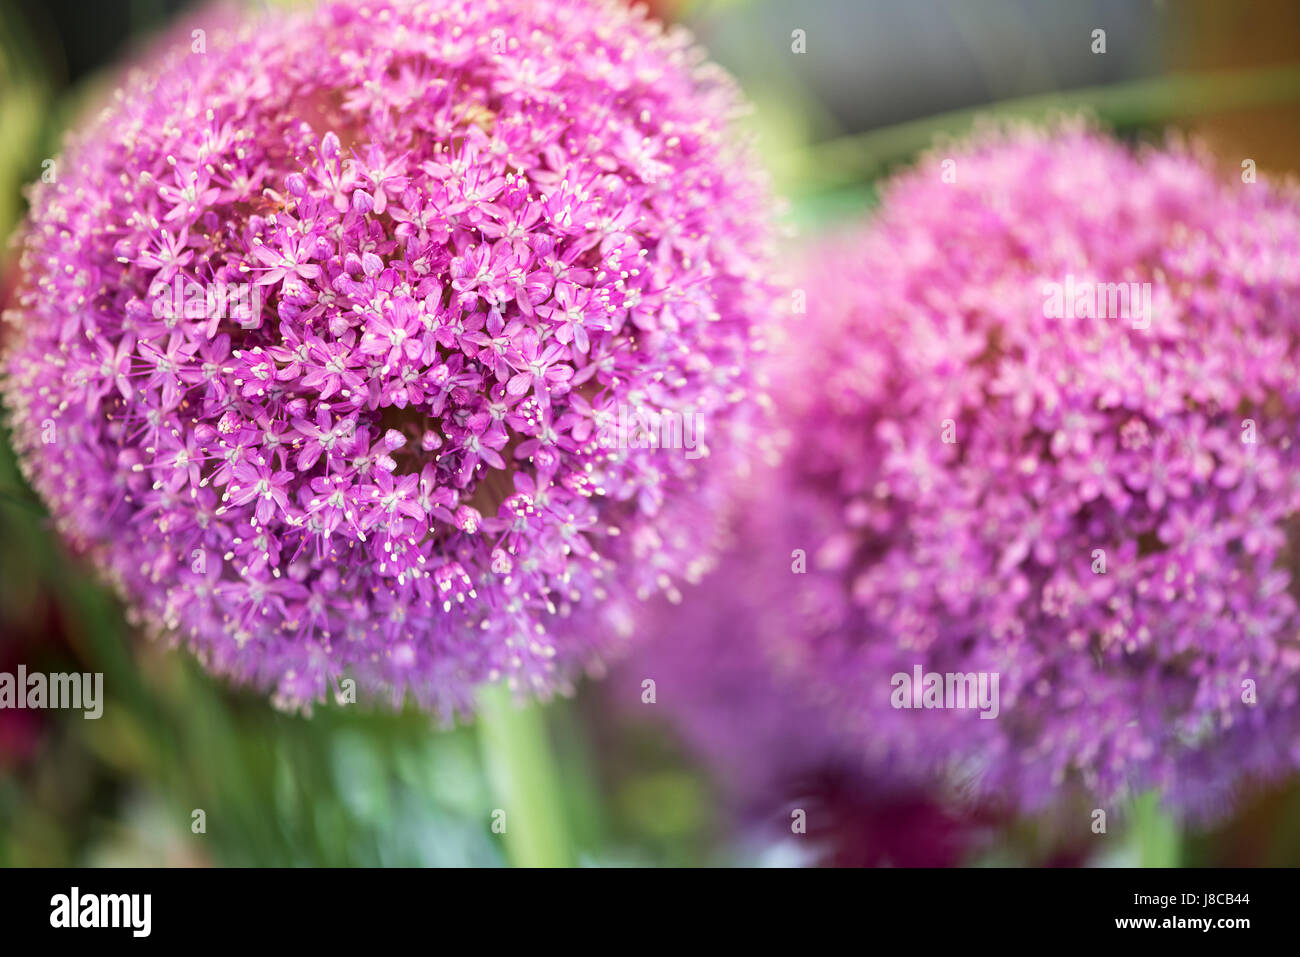 Colorful purple flower of Allium giganteum, or the Asian Gian Onion, cultivated as a food and as an ornamental garden plant Stock Photo